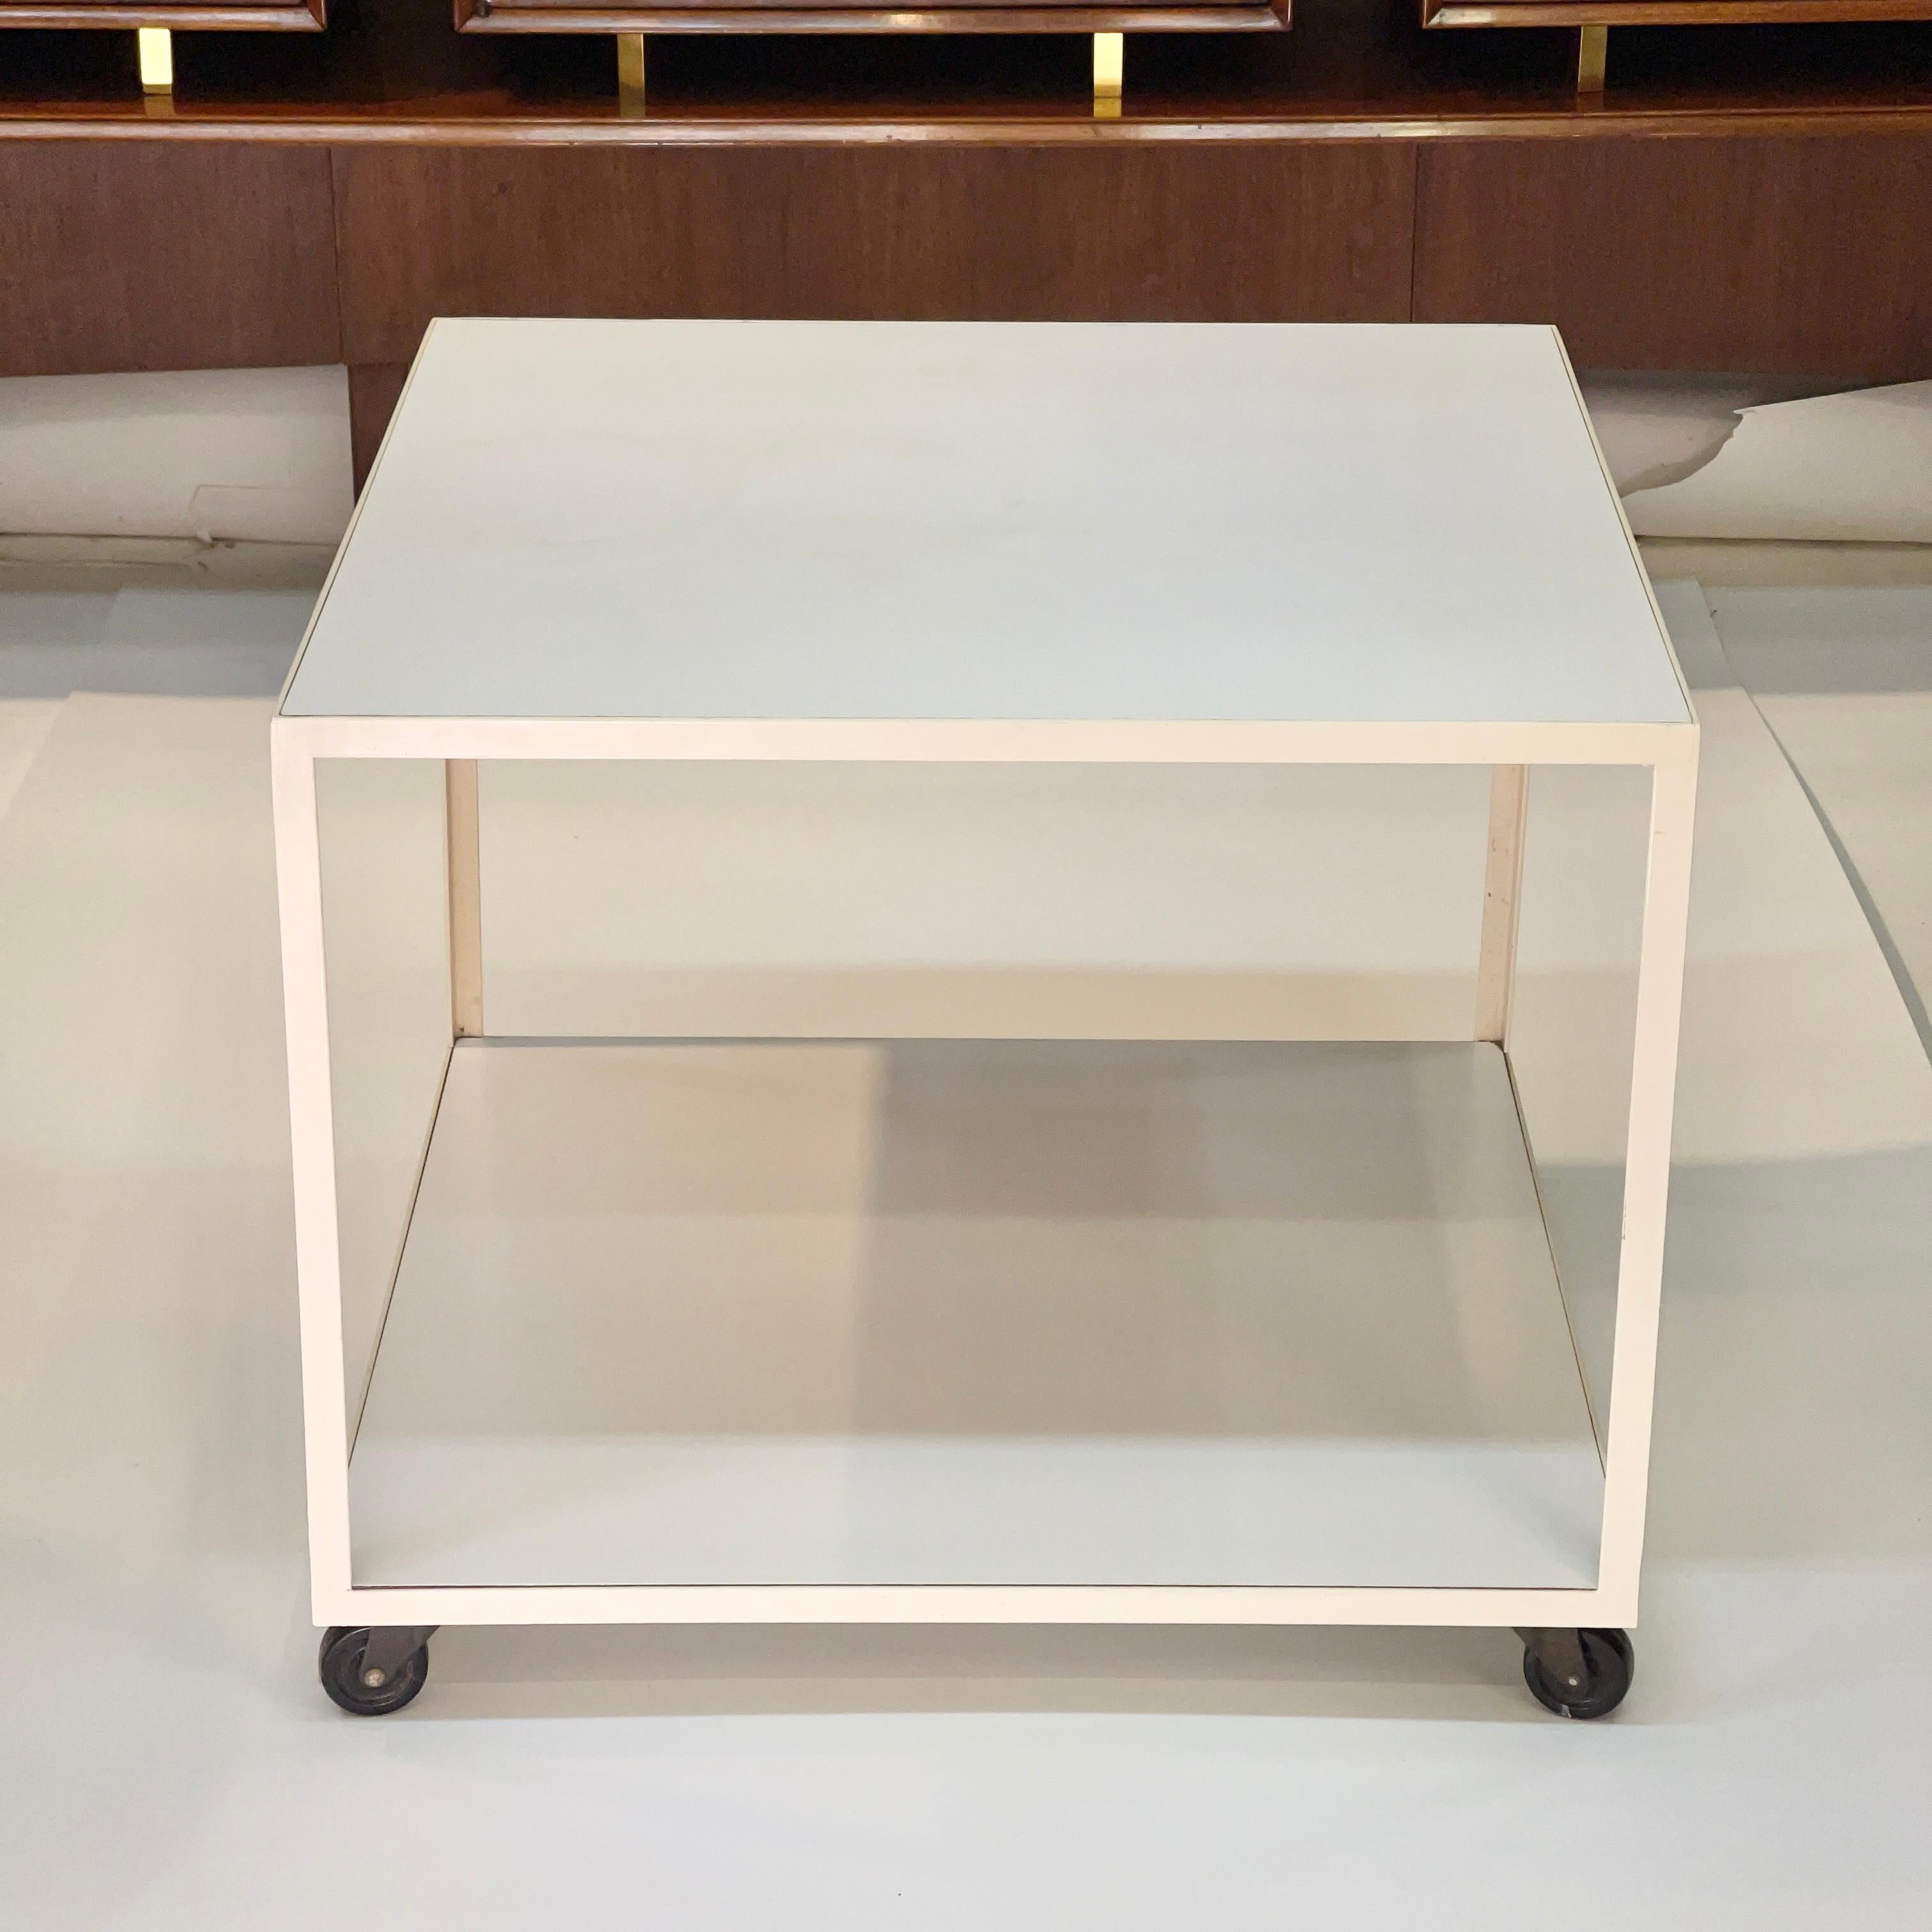 White enameled steel frame and white laminate rolling cart designed in 1951 by George Nelson for Herman Miller. Also referred to as an Angle Iron table. Original metal label present underneath top tier.
Per the George Nelson Foundation this table